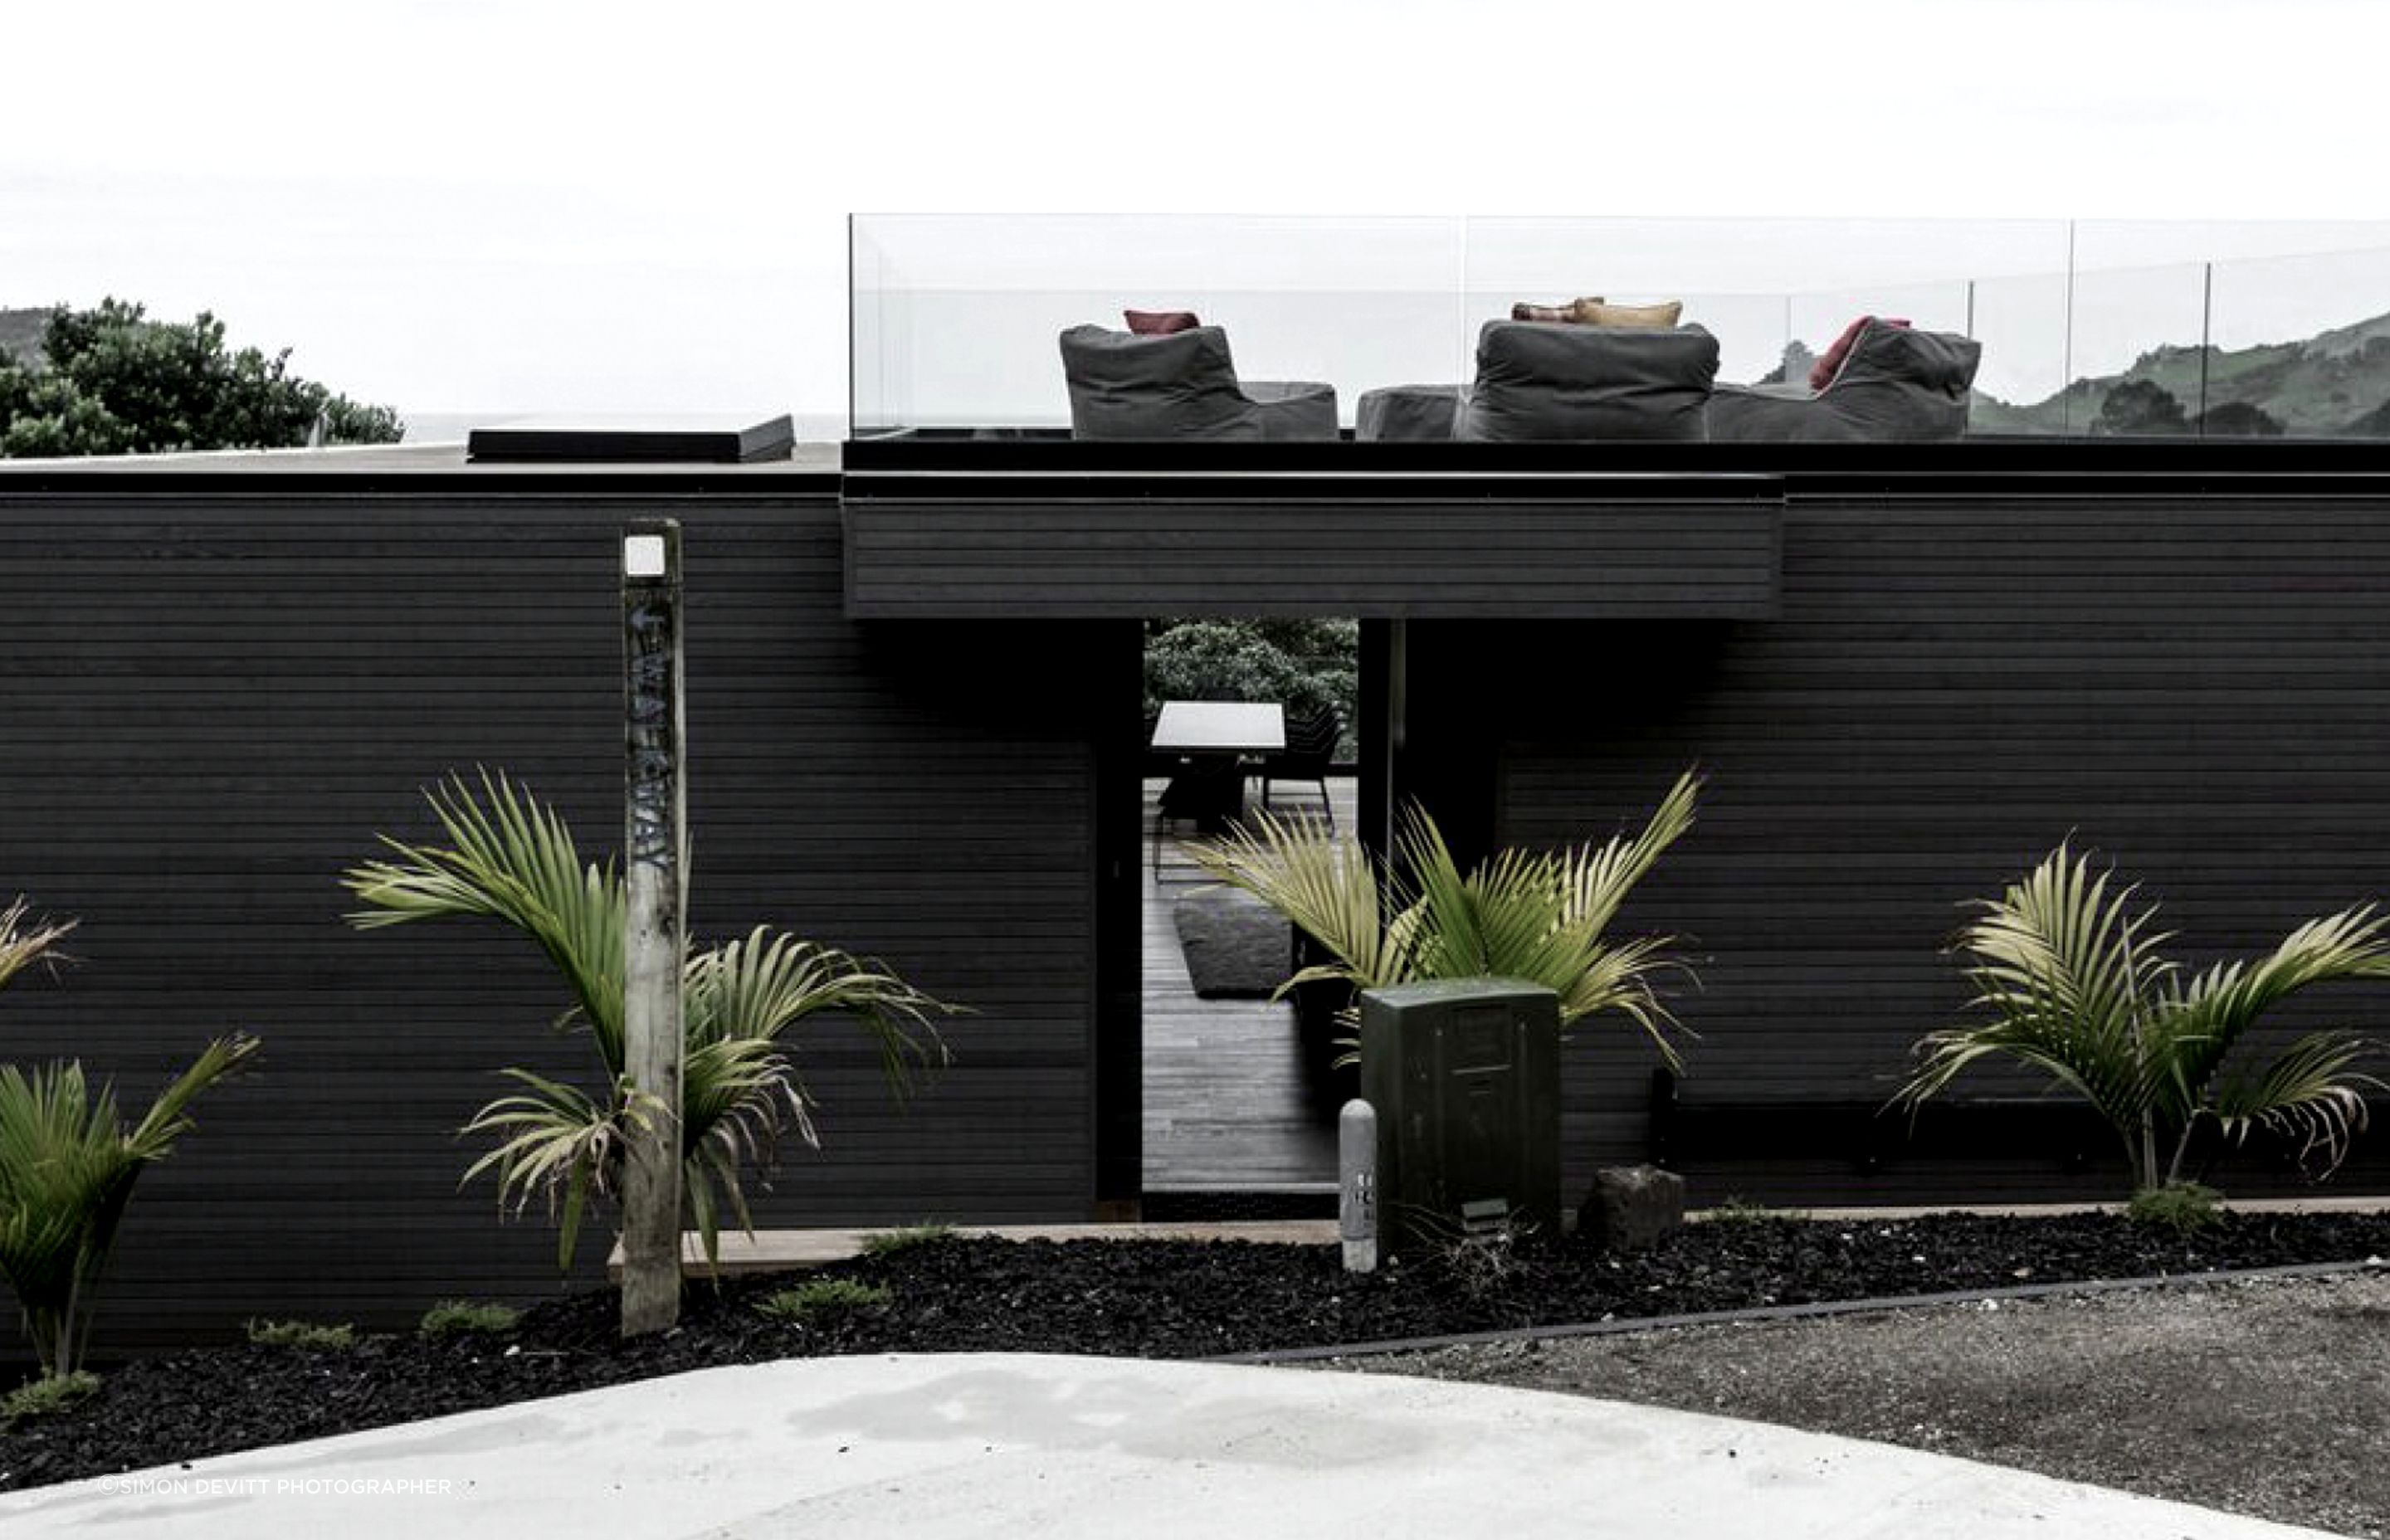 The Hahei Beach House in Coromandel by Chris Tate in collaboration with Evelyn McNamara.